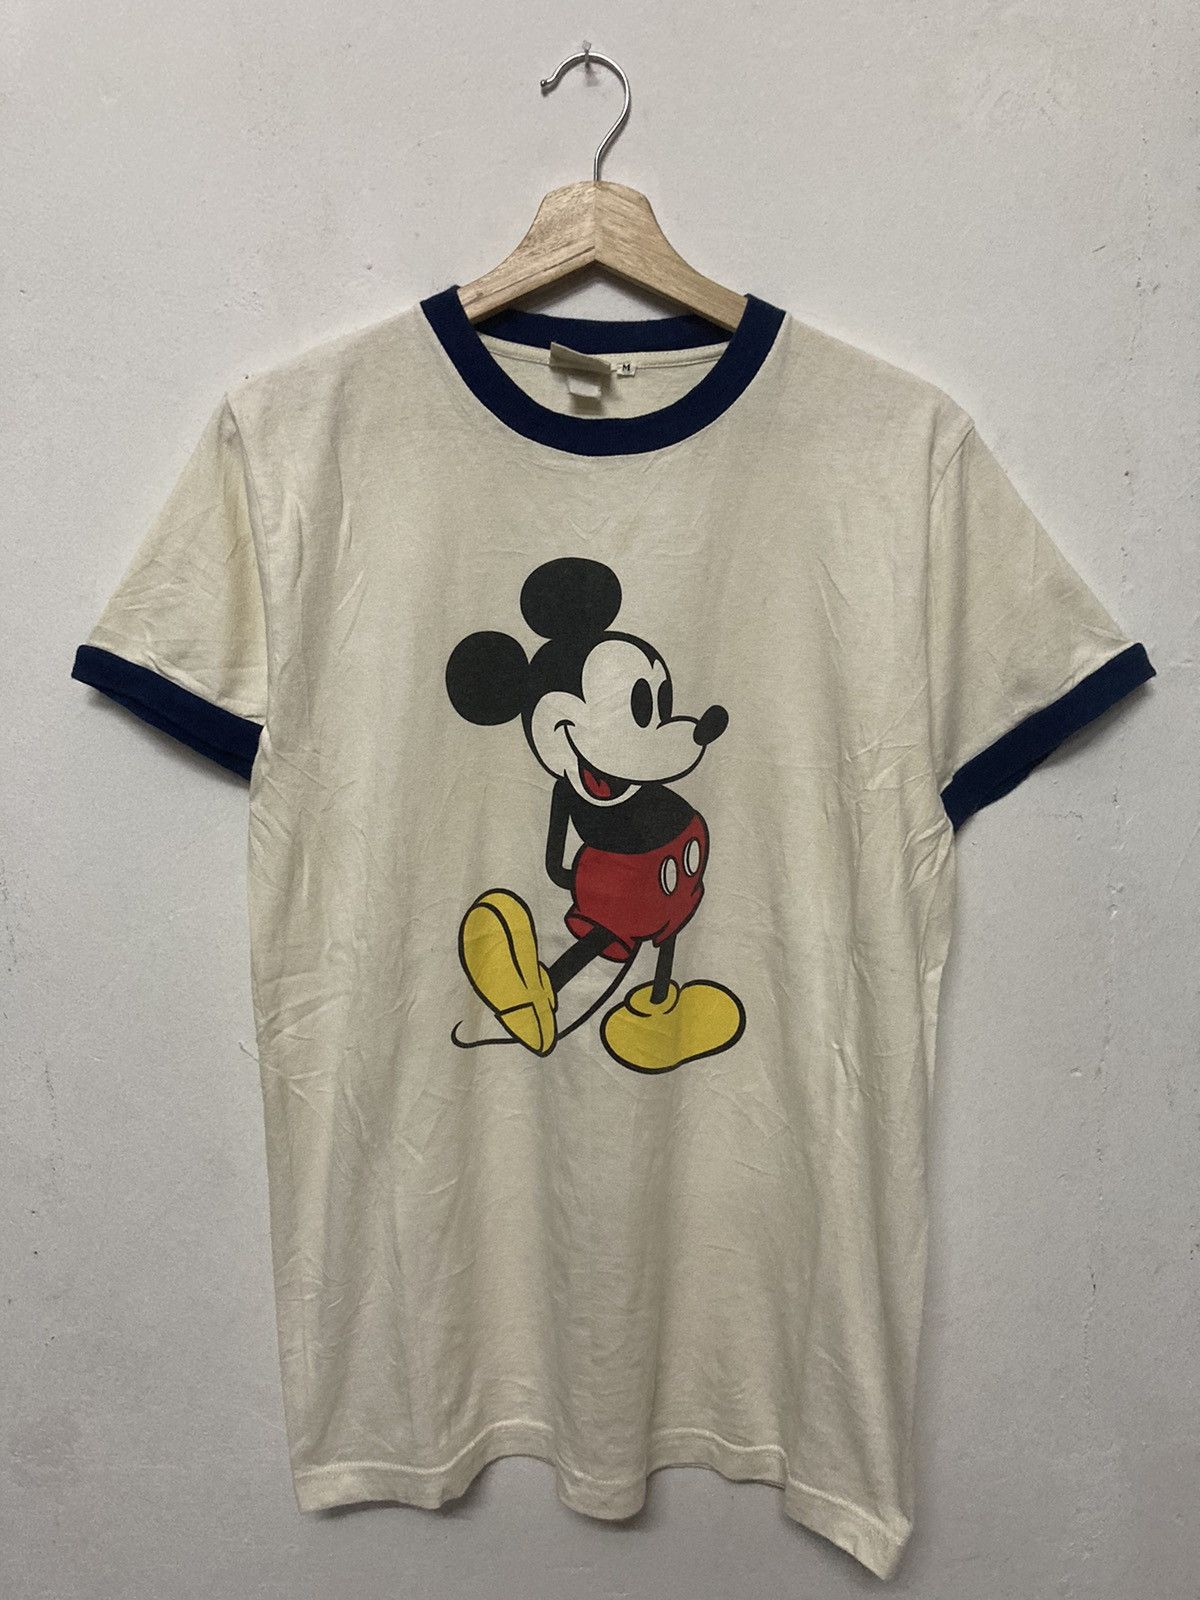 Vintage 90s Mickey Mouse Ringer T-shirt - 1